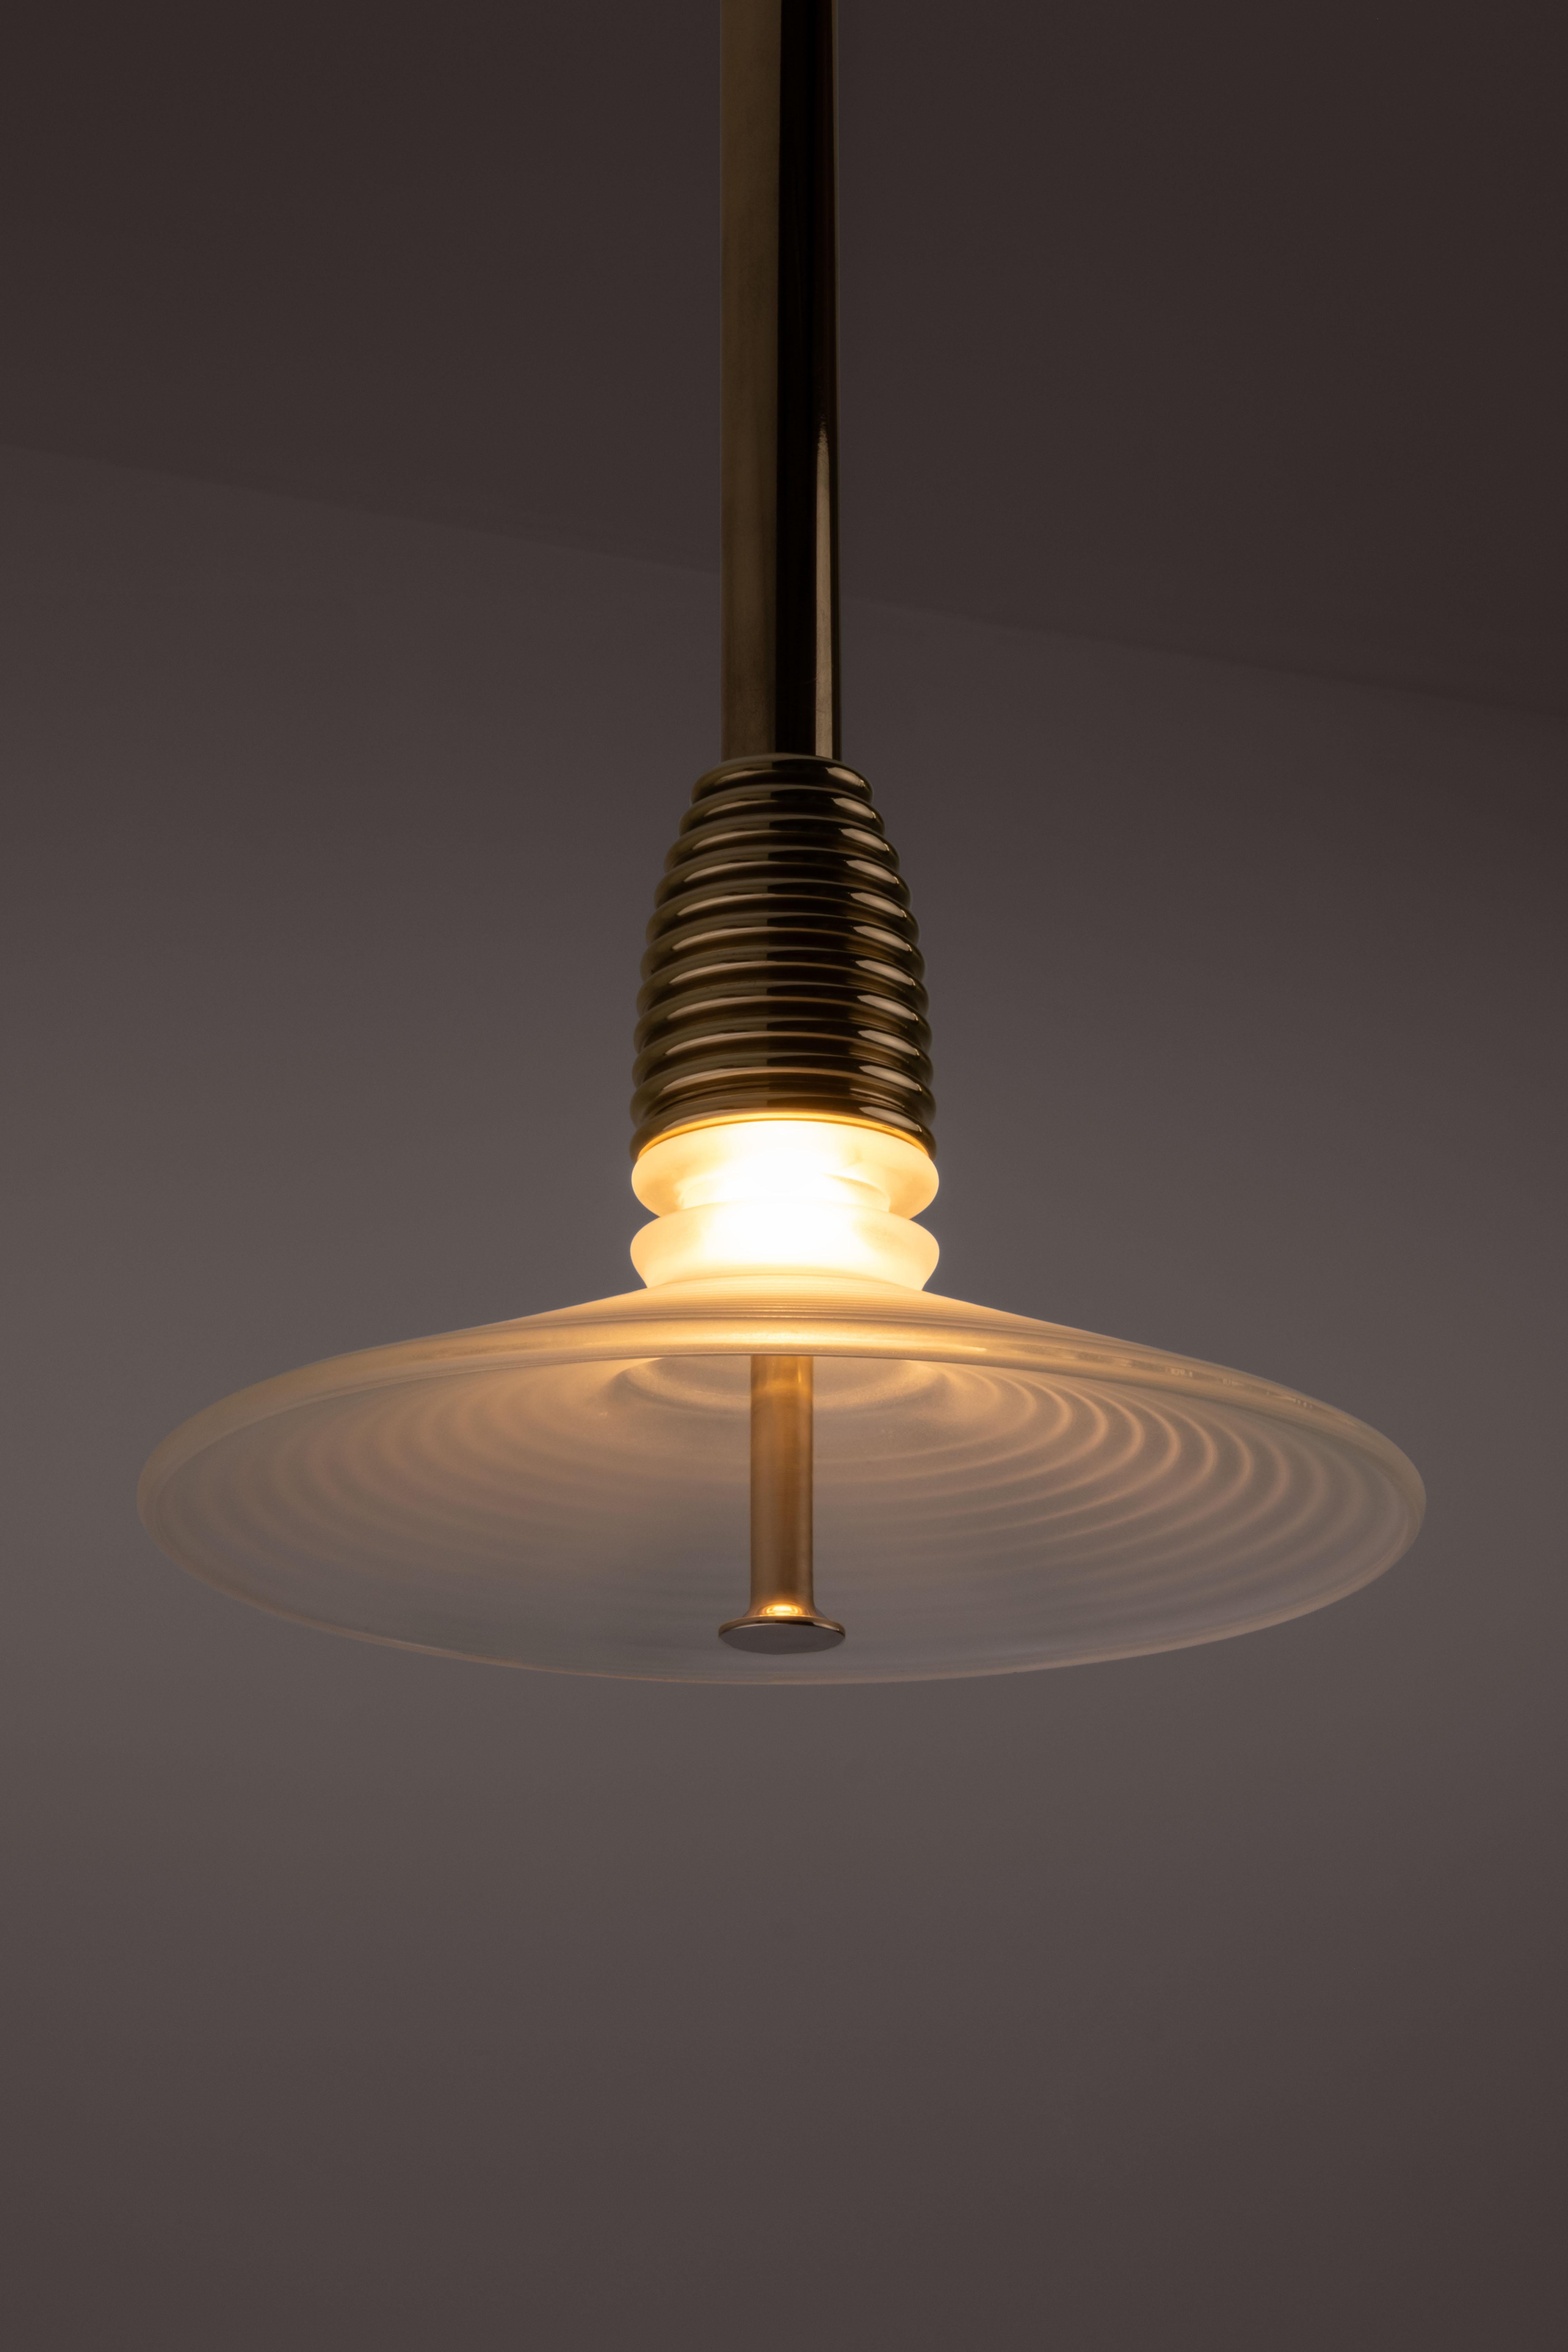 The Insulator 'B' Pendant in dark brass and clear glass by NOVOCASTRIAN deco For Sale 12